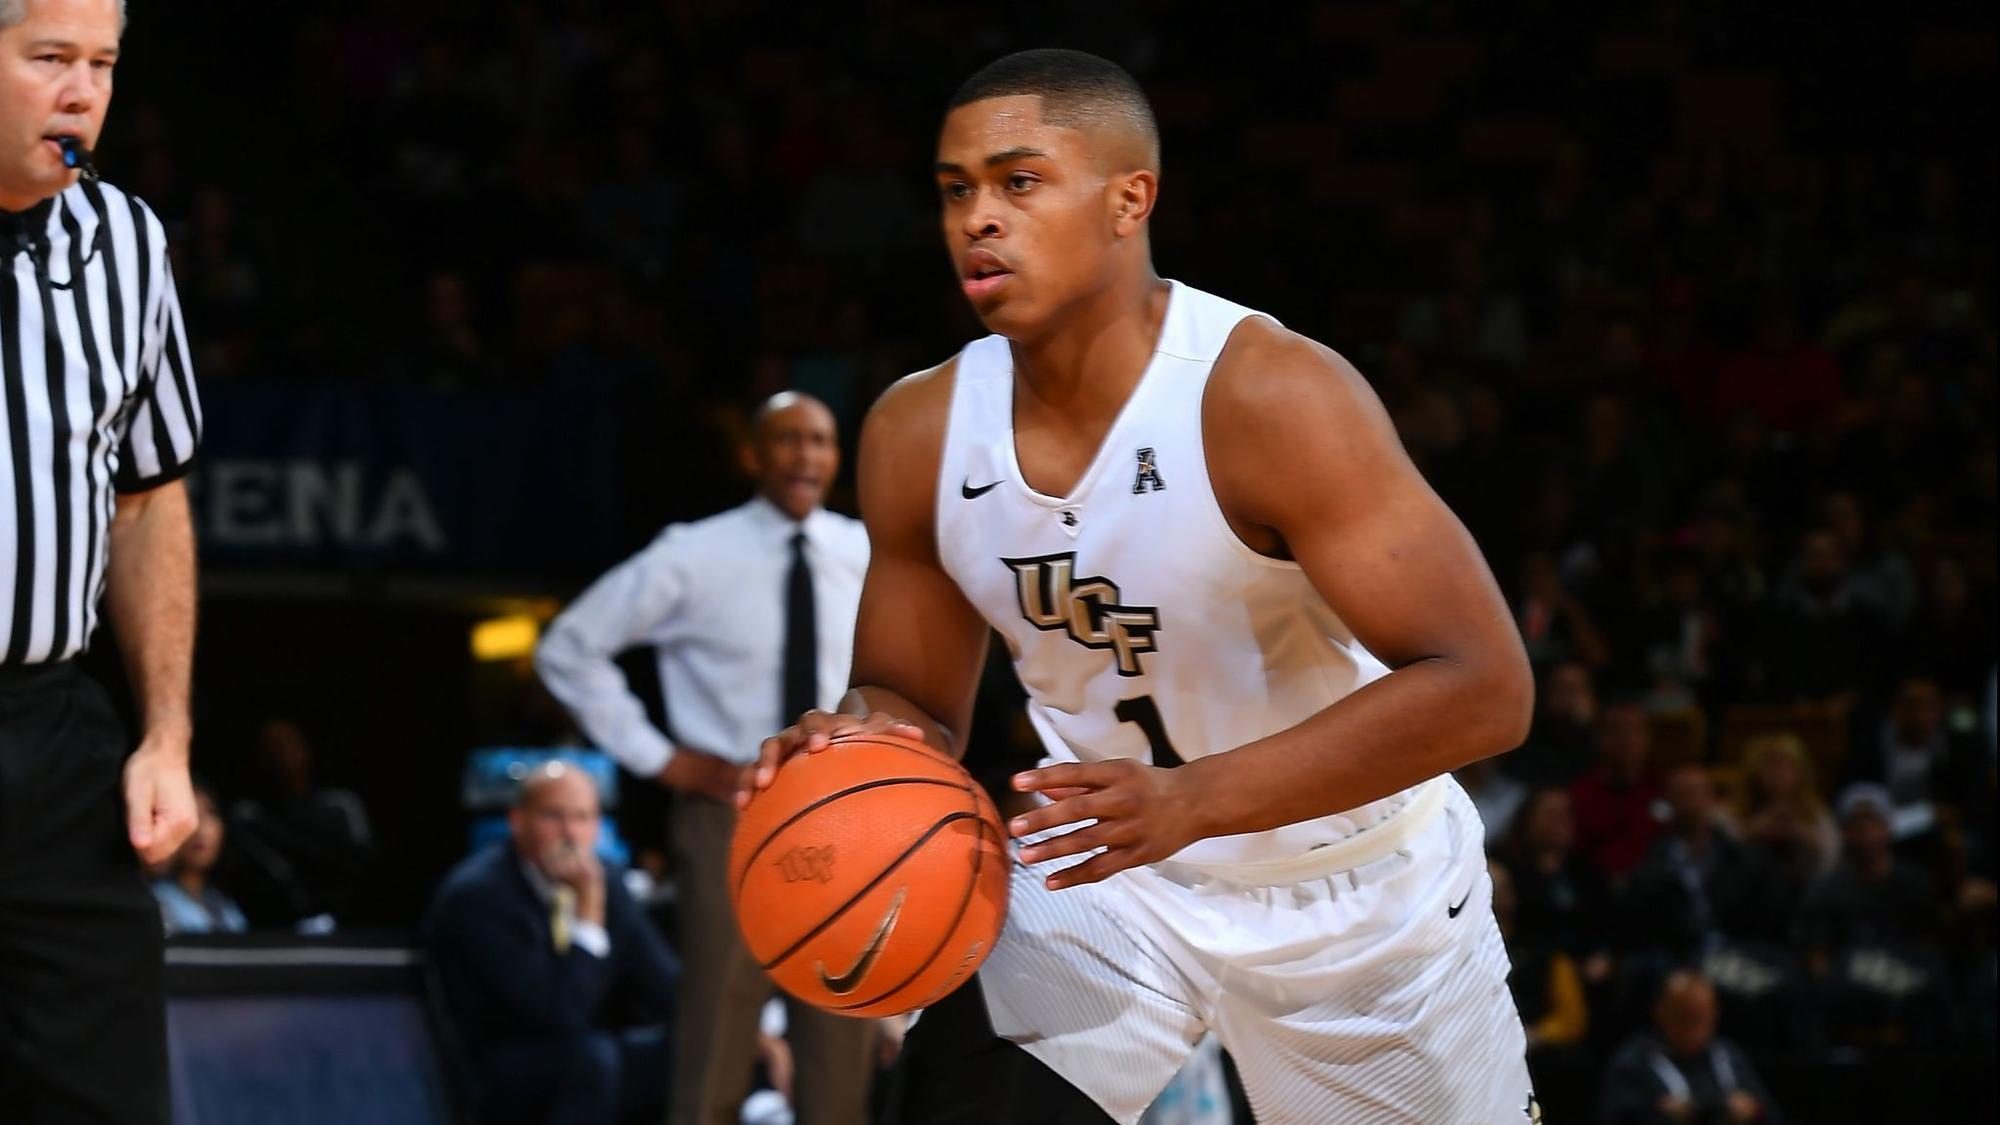 UCF basketball earns second win over UConn in school history